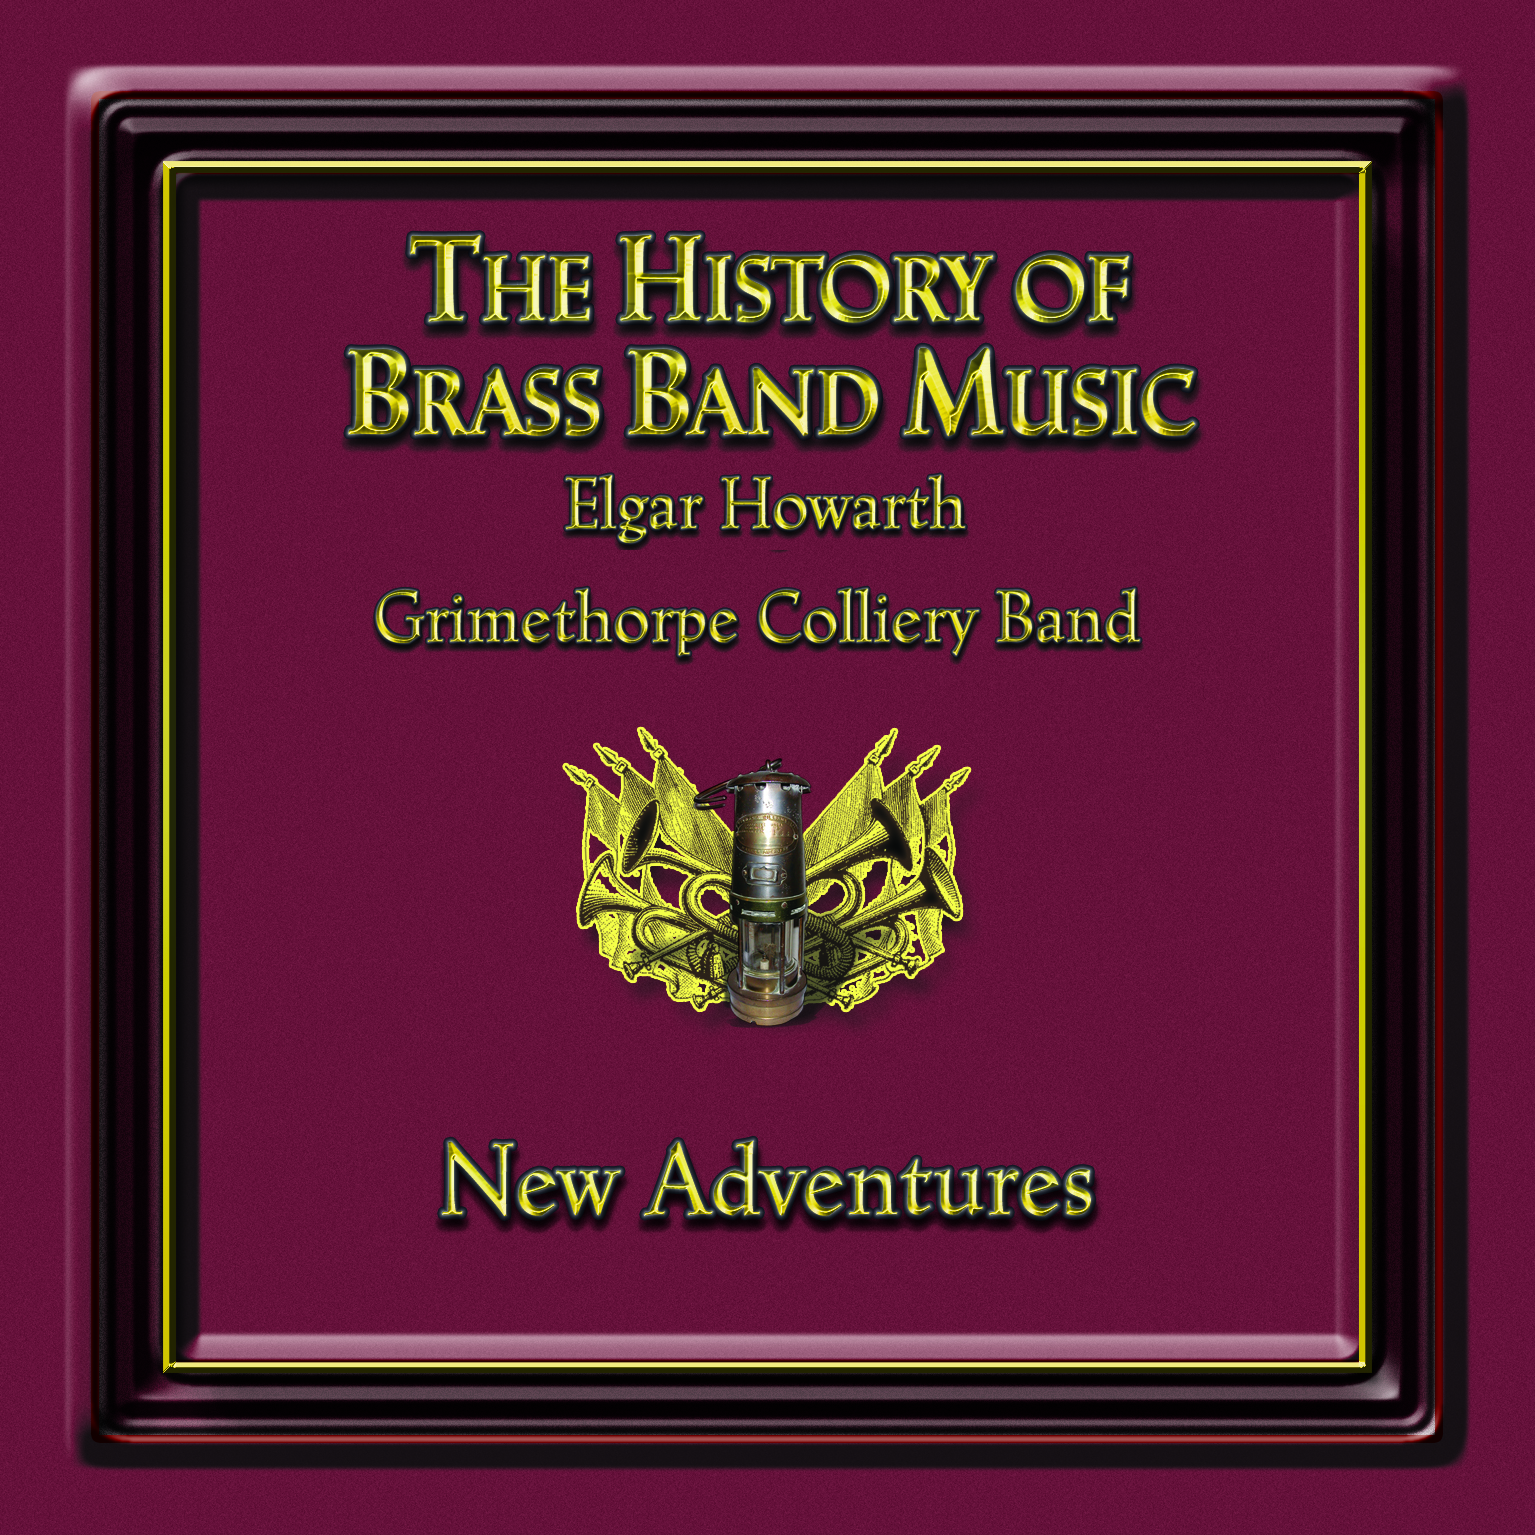 The History of Brass Band Music - New Adventures - Download